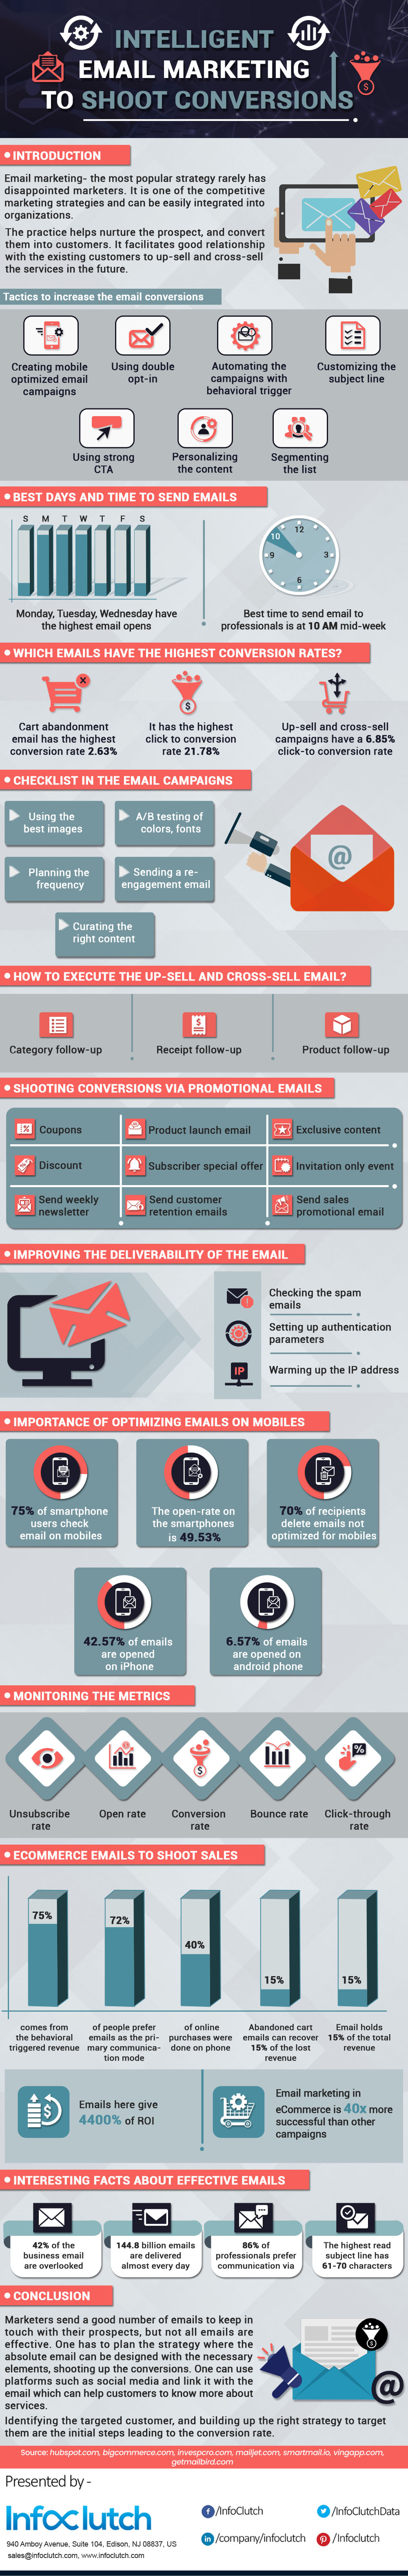 Intelligent Email Marketing to Shoot Conversions